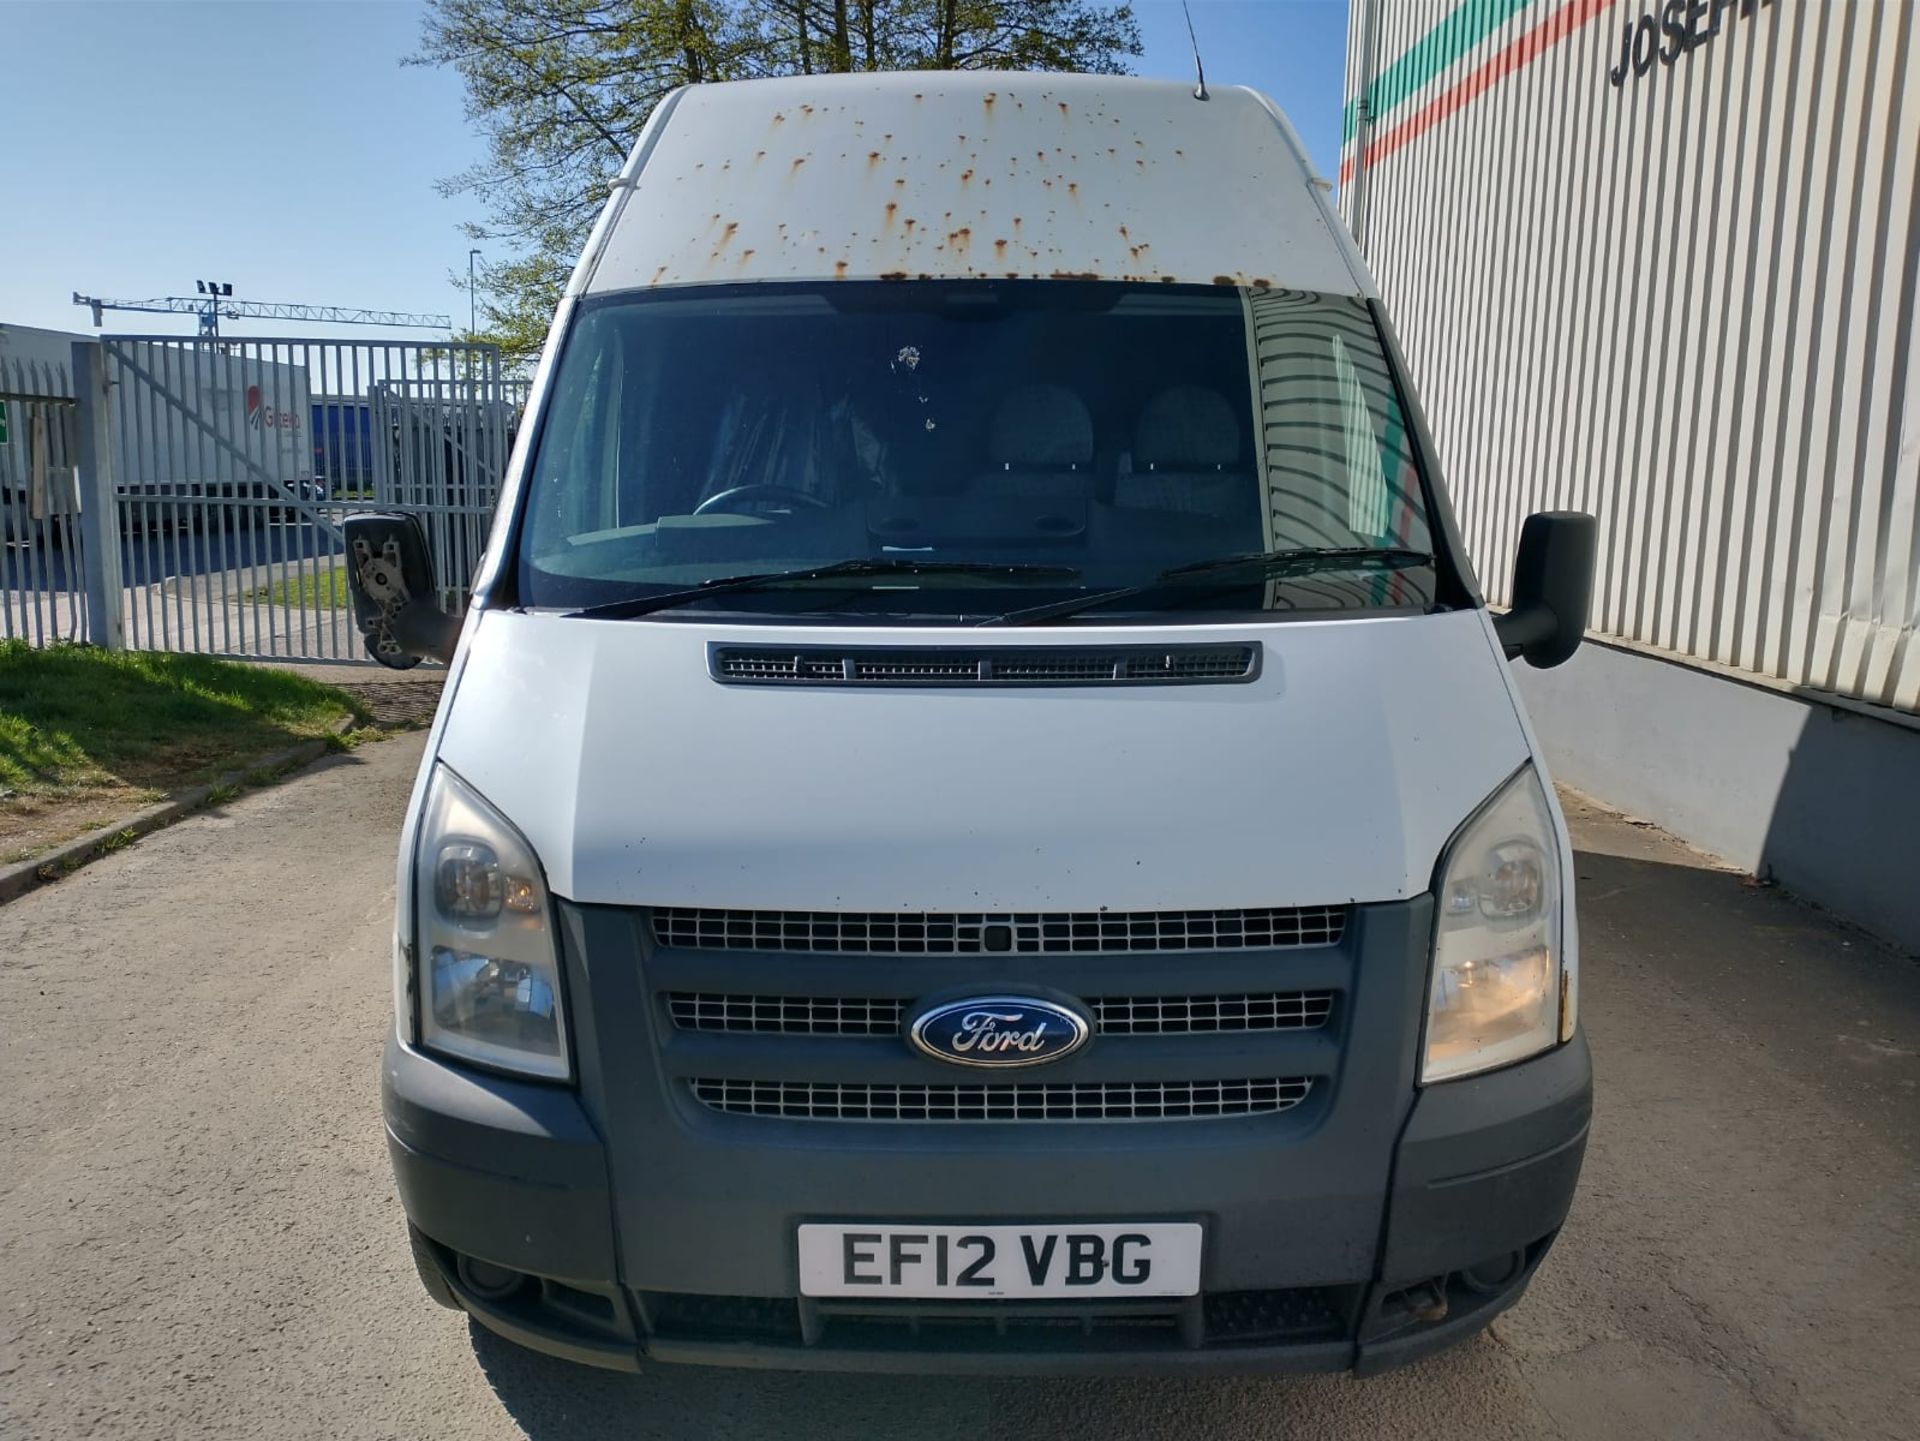 2012 Ford Transit Panel Van 2.2 5dr Medium Roof Panel Van - CL505 - Location: Corby - Image 4 of 13